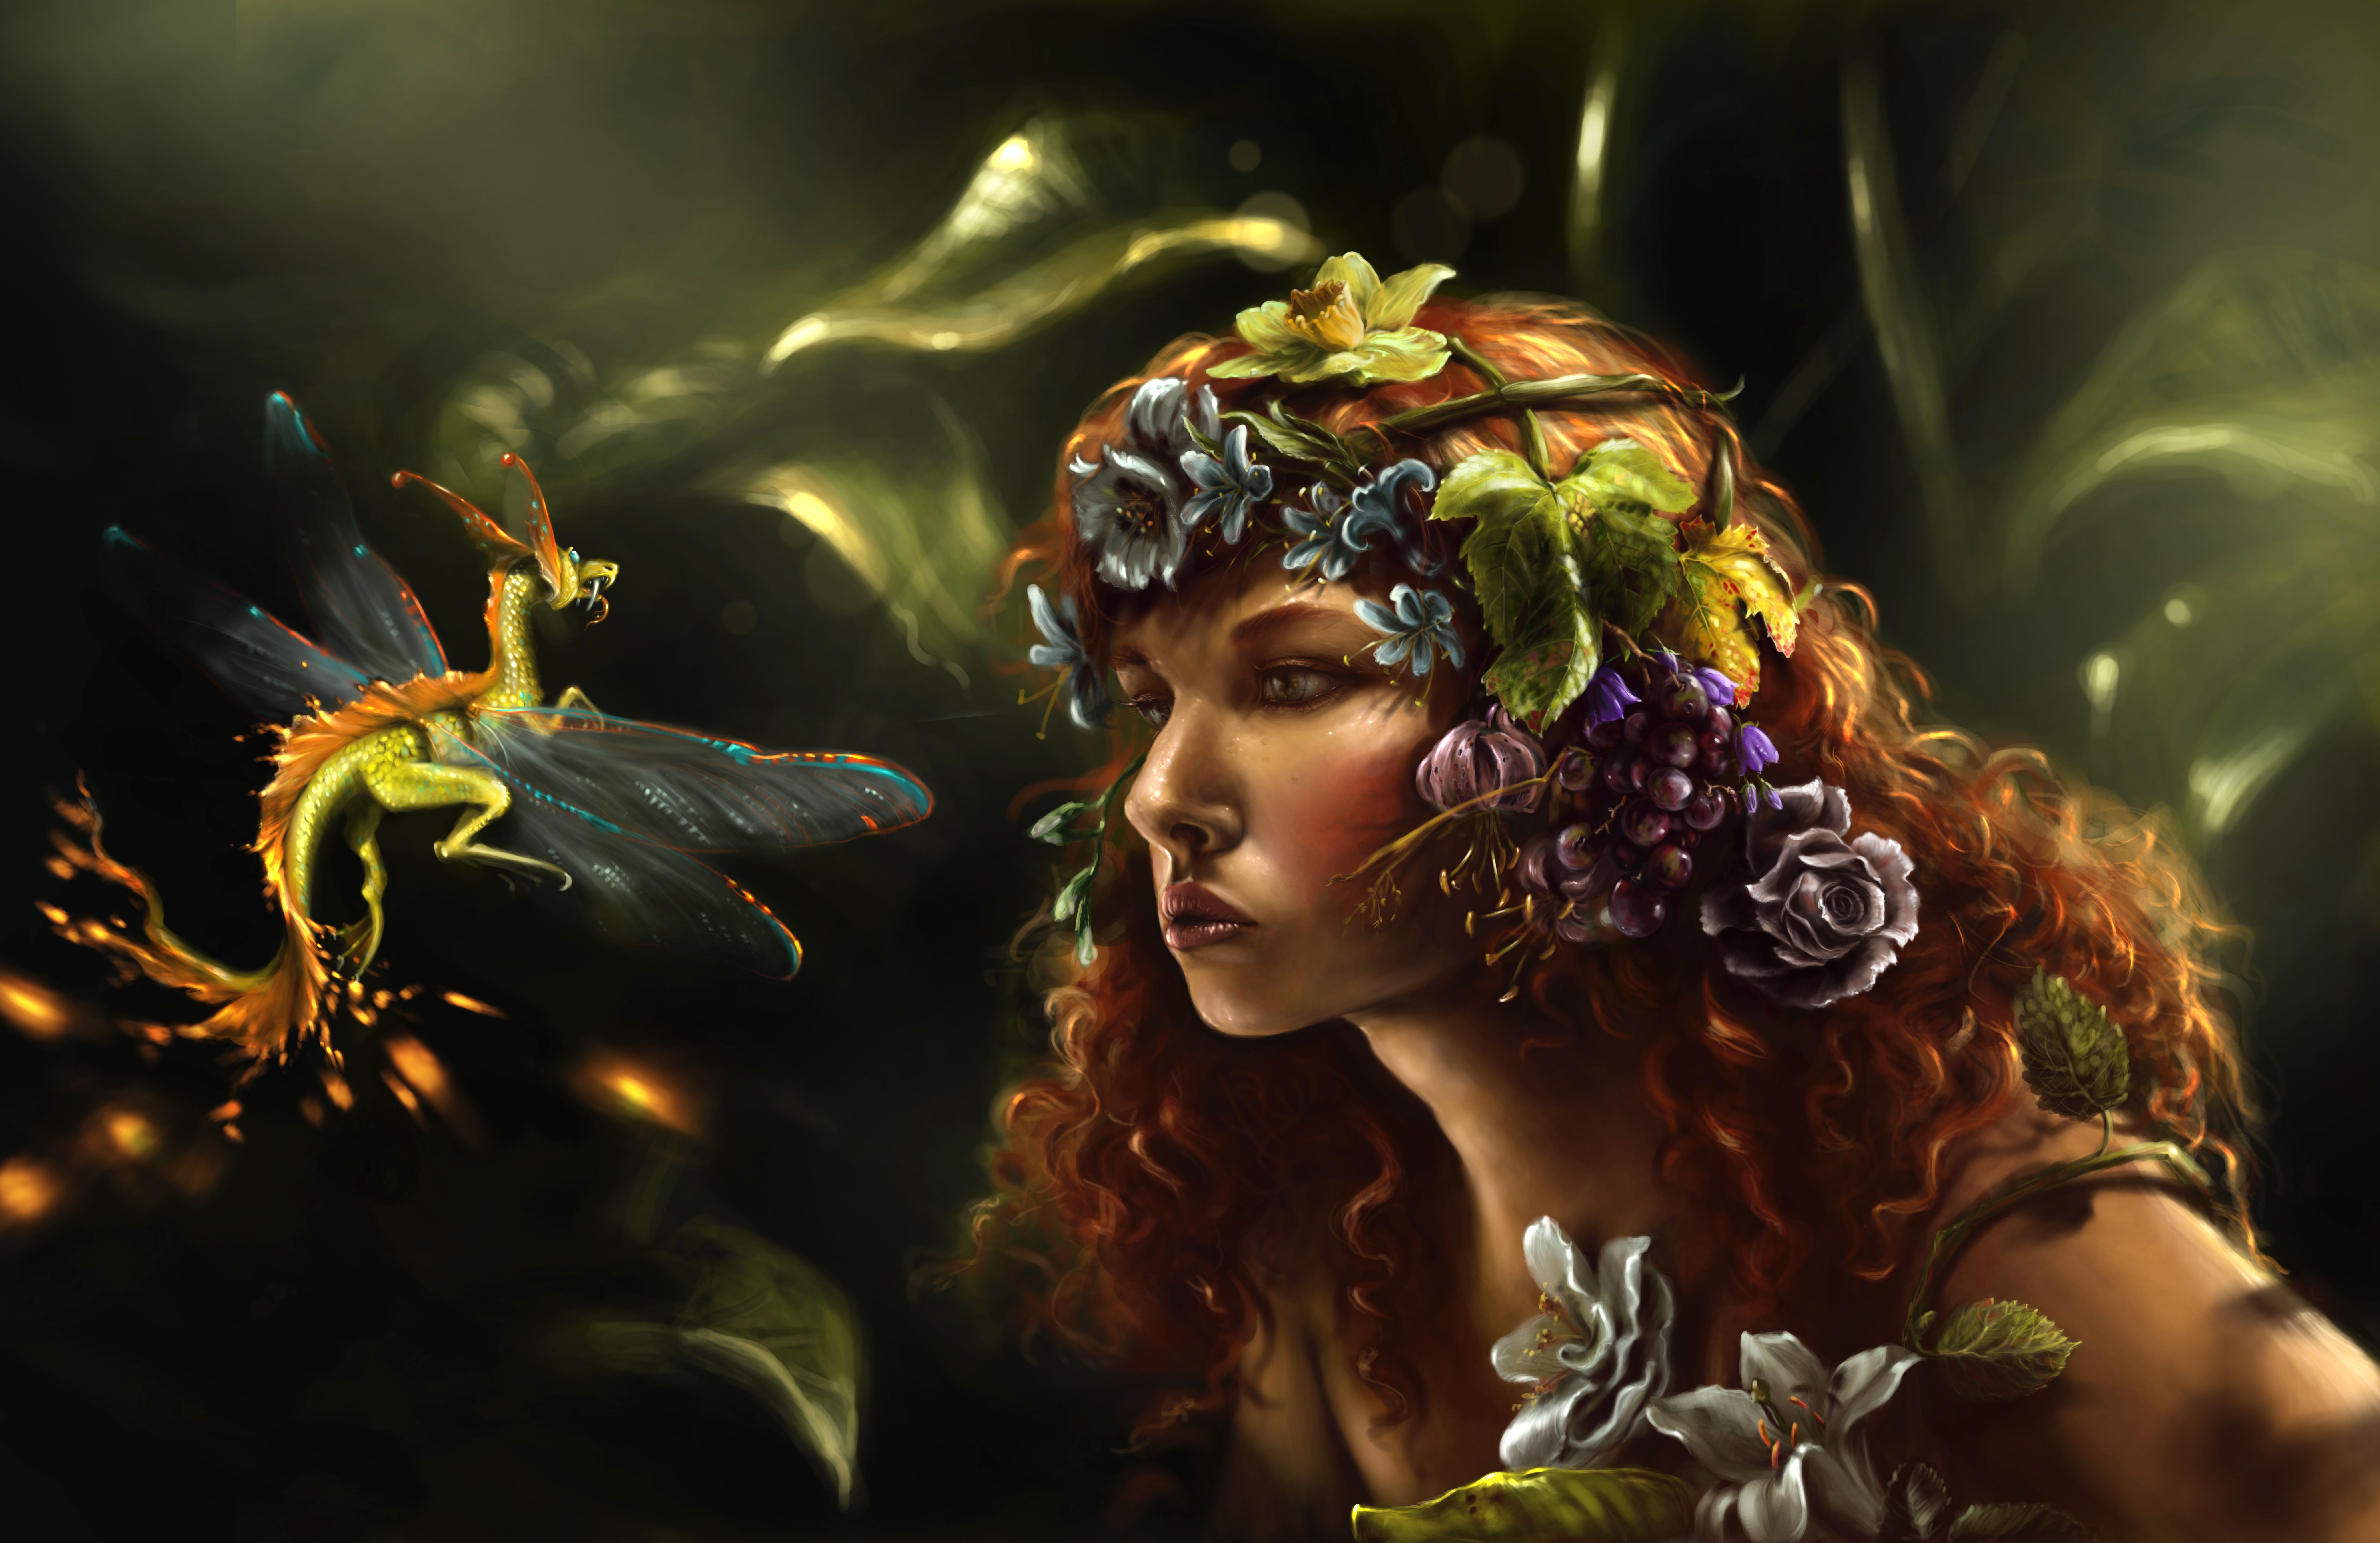 Forest Fairy and Tiny Dragon 8k Ultra HD Wallpaper. Background